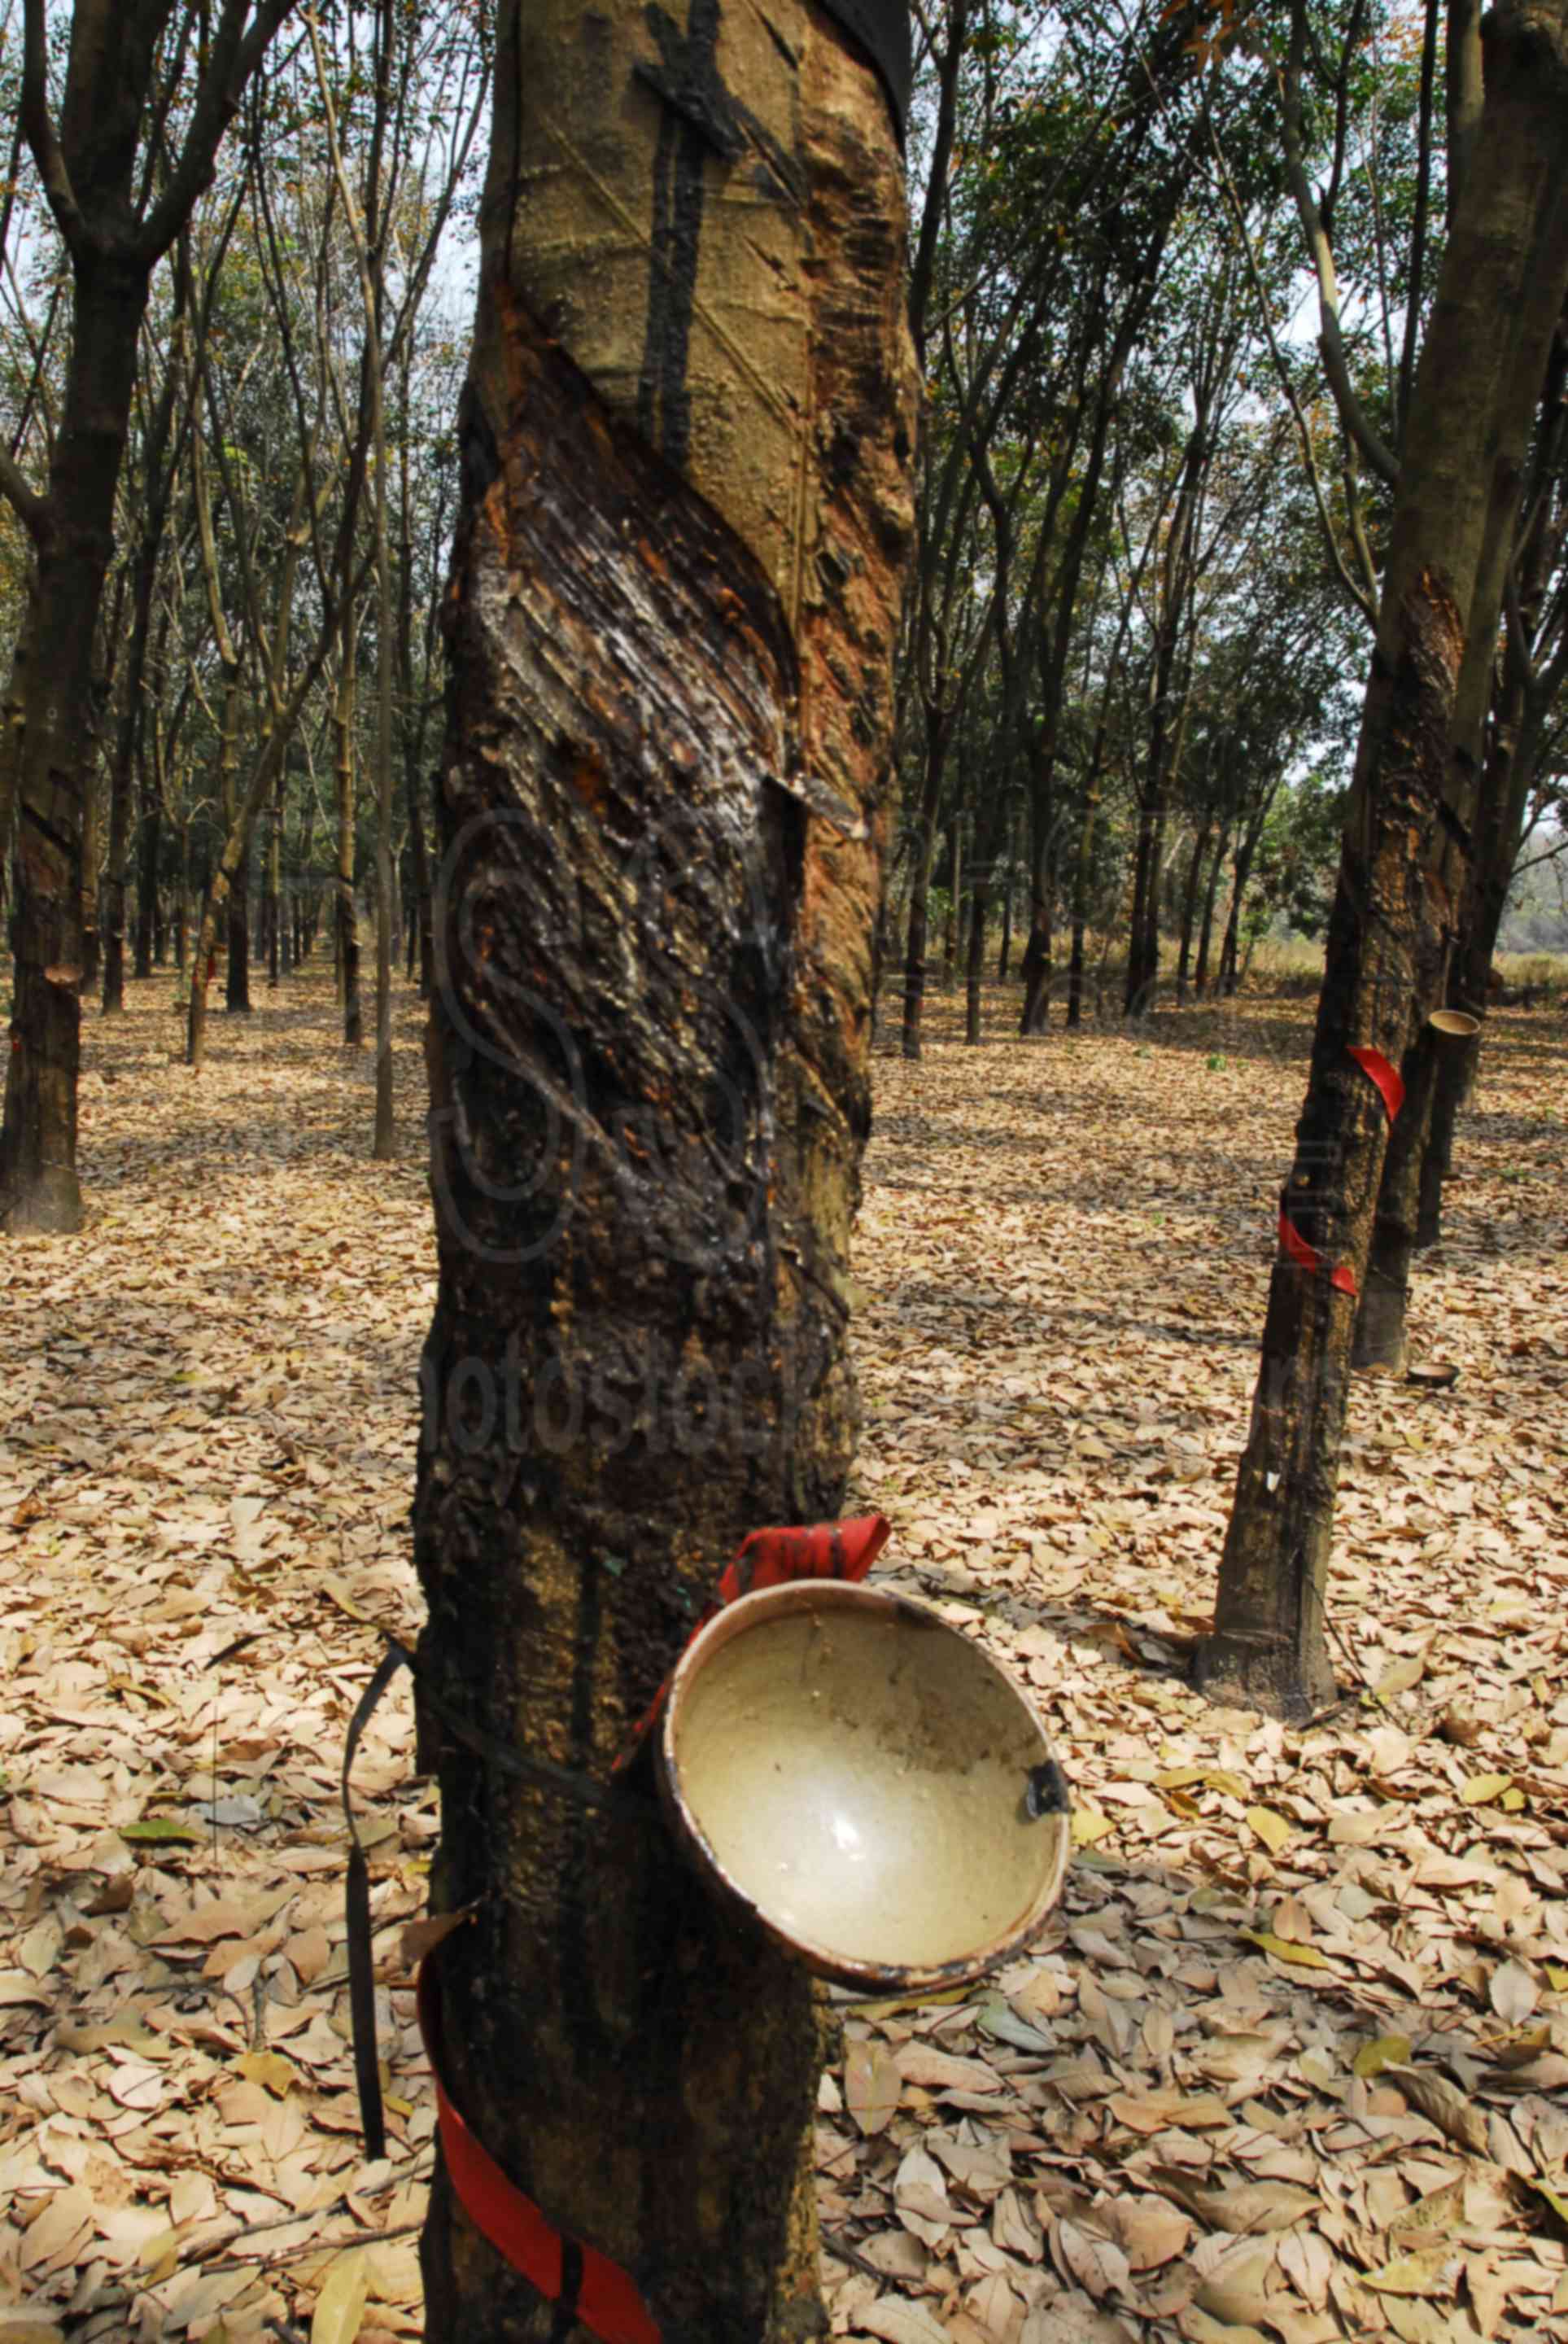 Rubber Collection Bowl,rubber,sap,harvest,orchard,trees,rows,cultivate